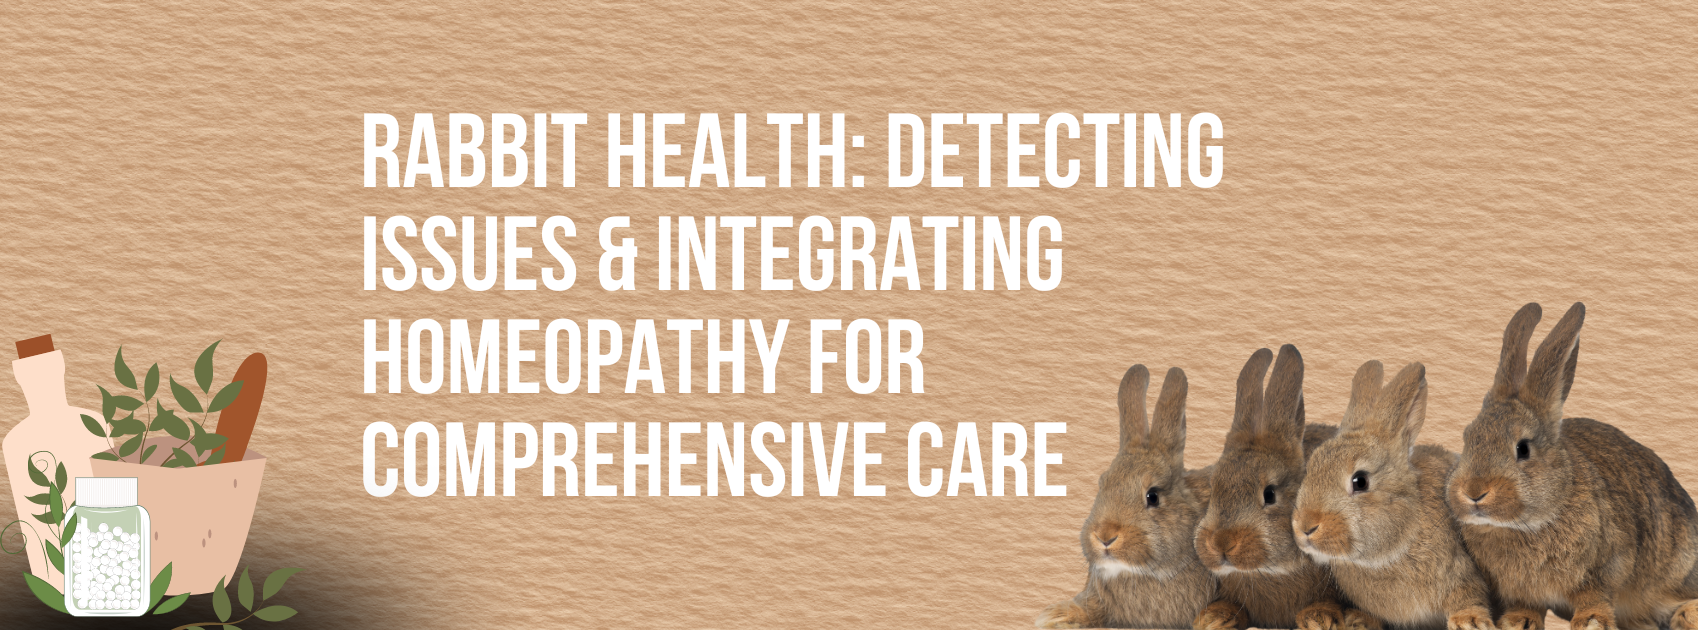 Rabbit Health: Detecting Issues & Integrating Homeopathy for Comprehensive Care